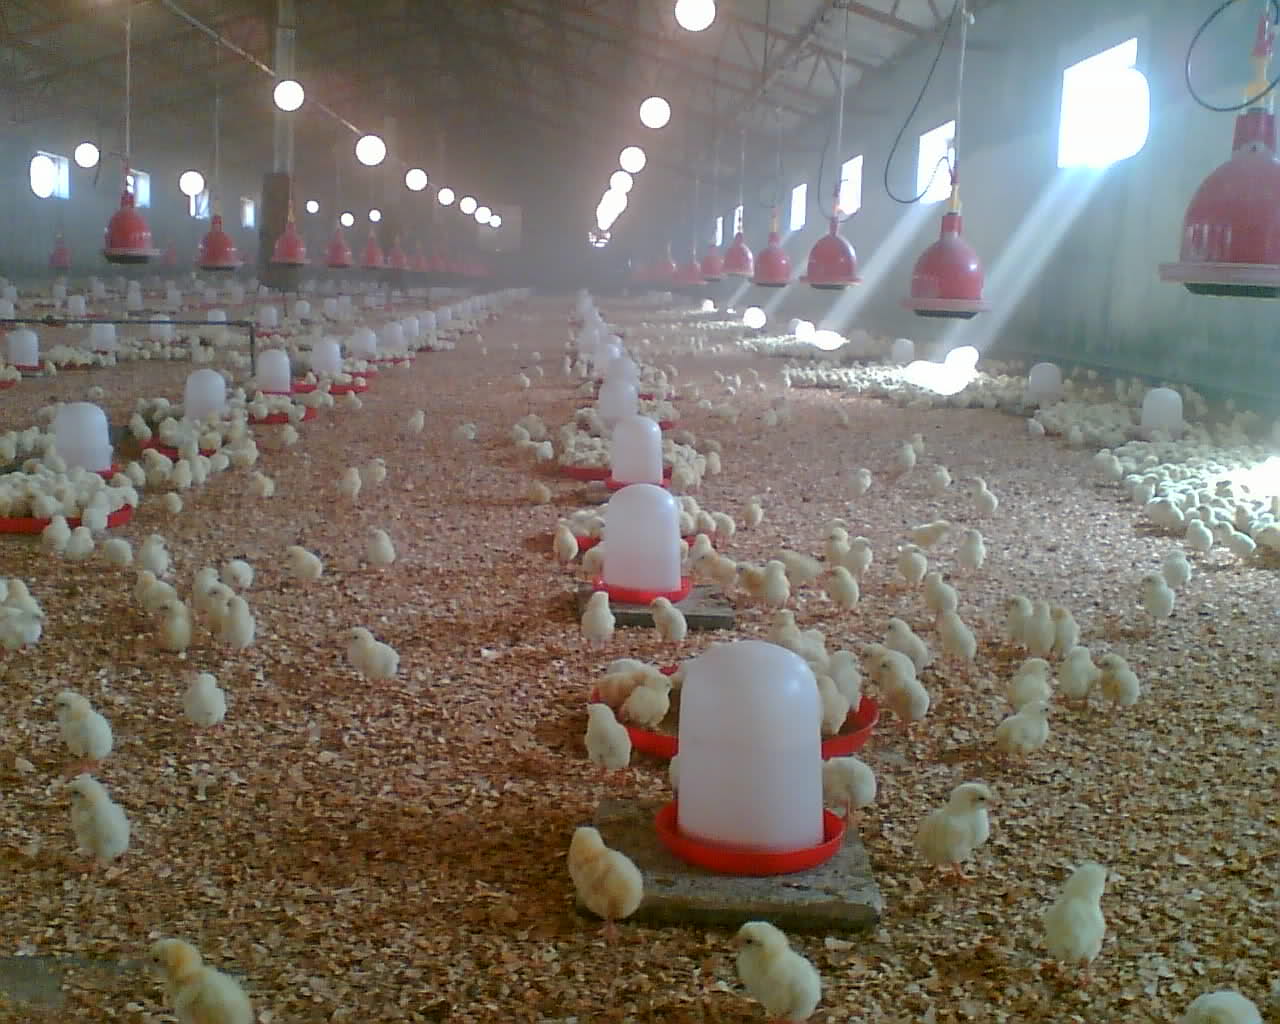 How do i write a business plan for poultry farm of 500 